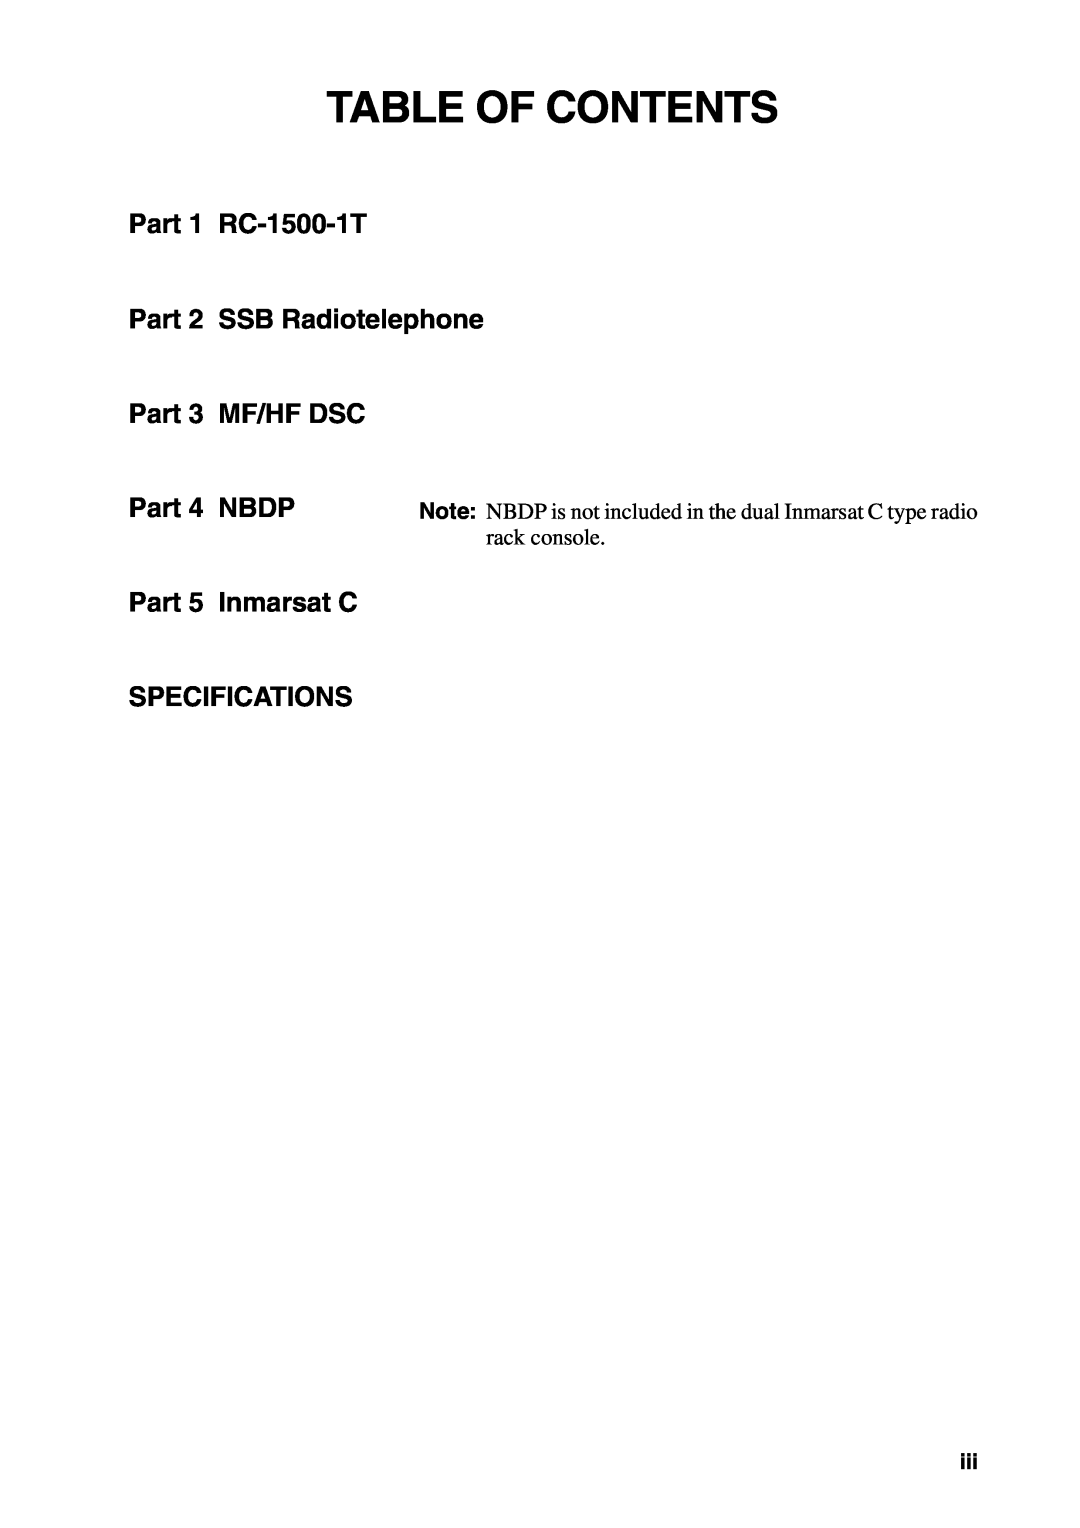 Furuno manual Table Of Contents, Part 1 RC-1500-1T, SSB Radiotelephone, Mf/Hf Dsc, Nbdp, Inmarsat C, Specifications 